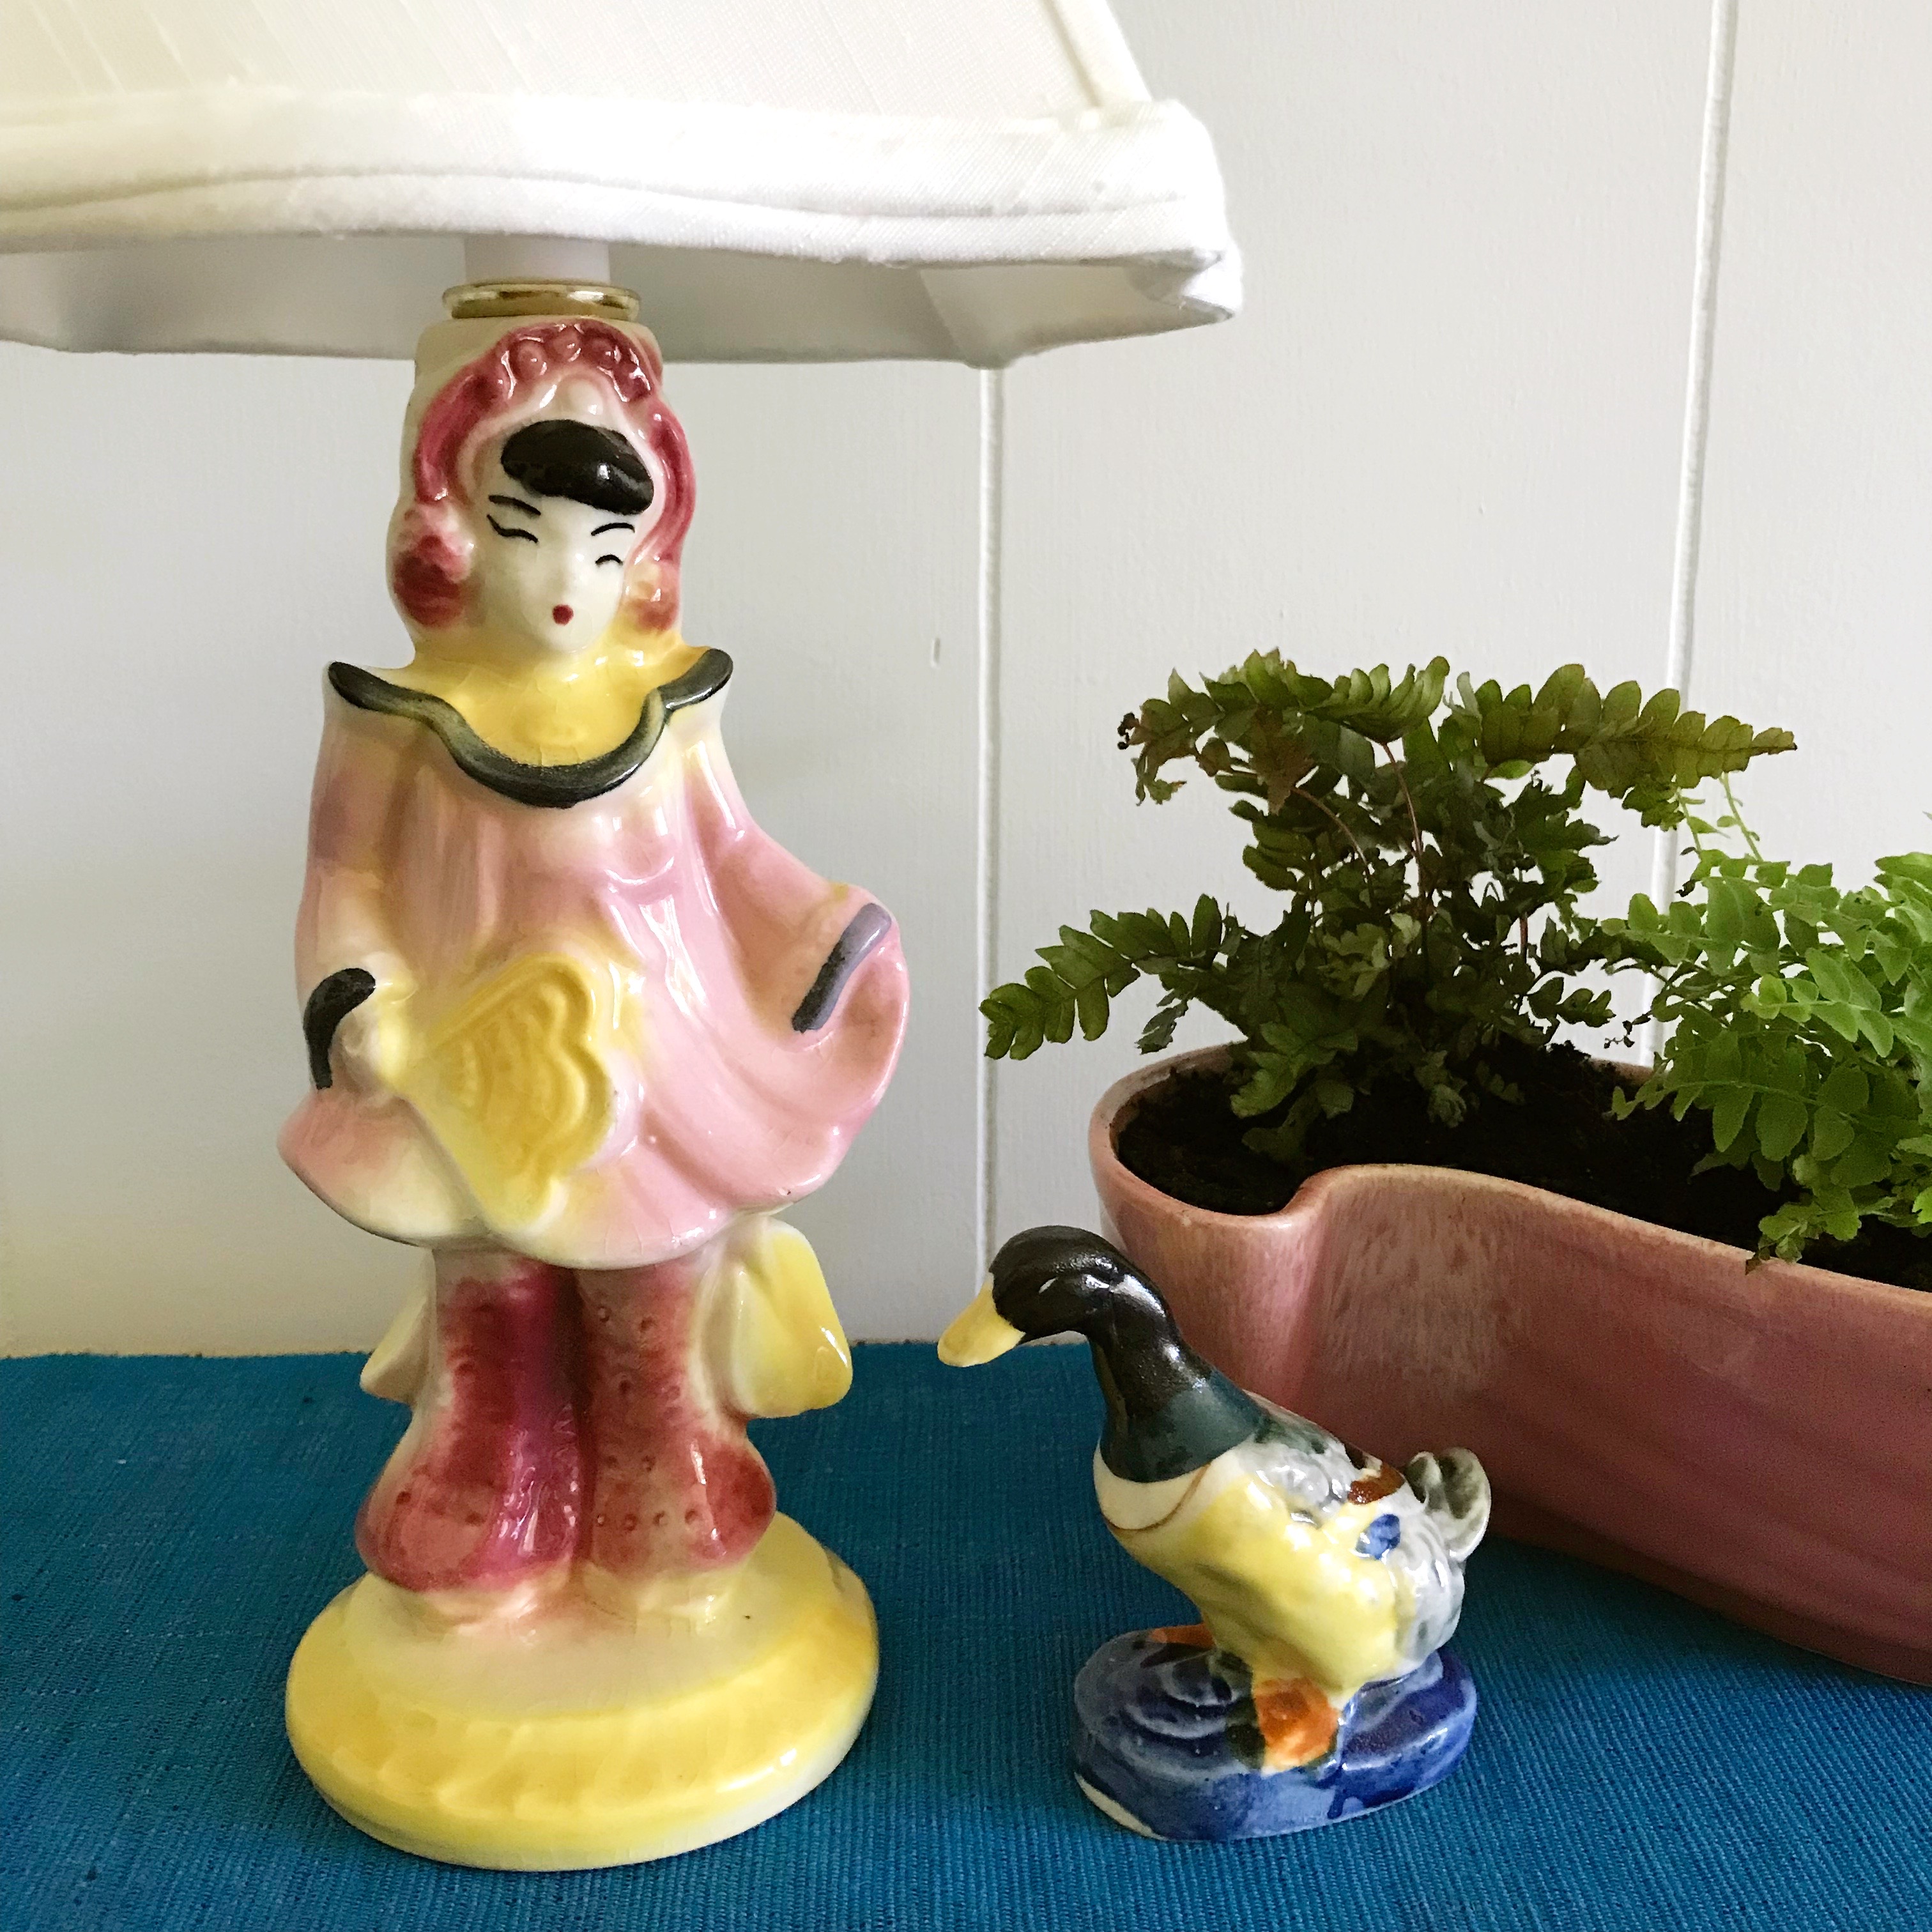 Under The Plum Blossom Tree, Vintage Finds: Chinoiserie Figurine Lamp